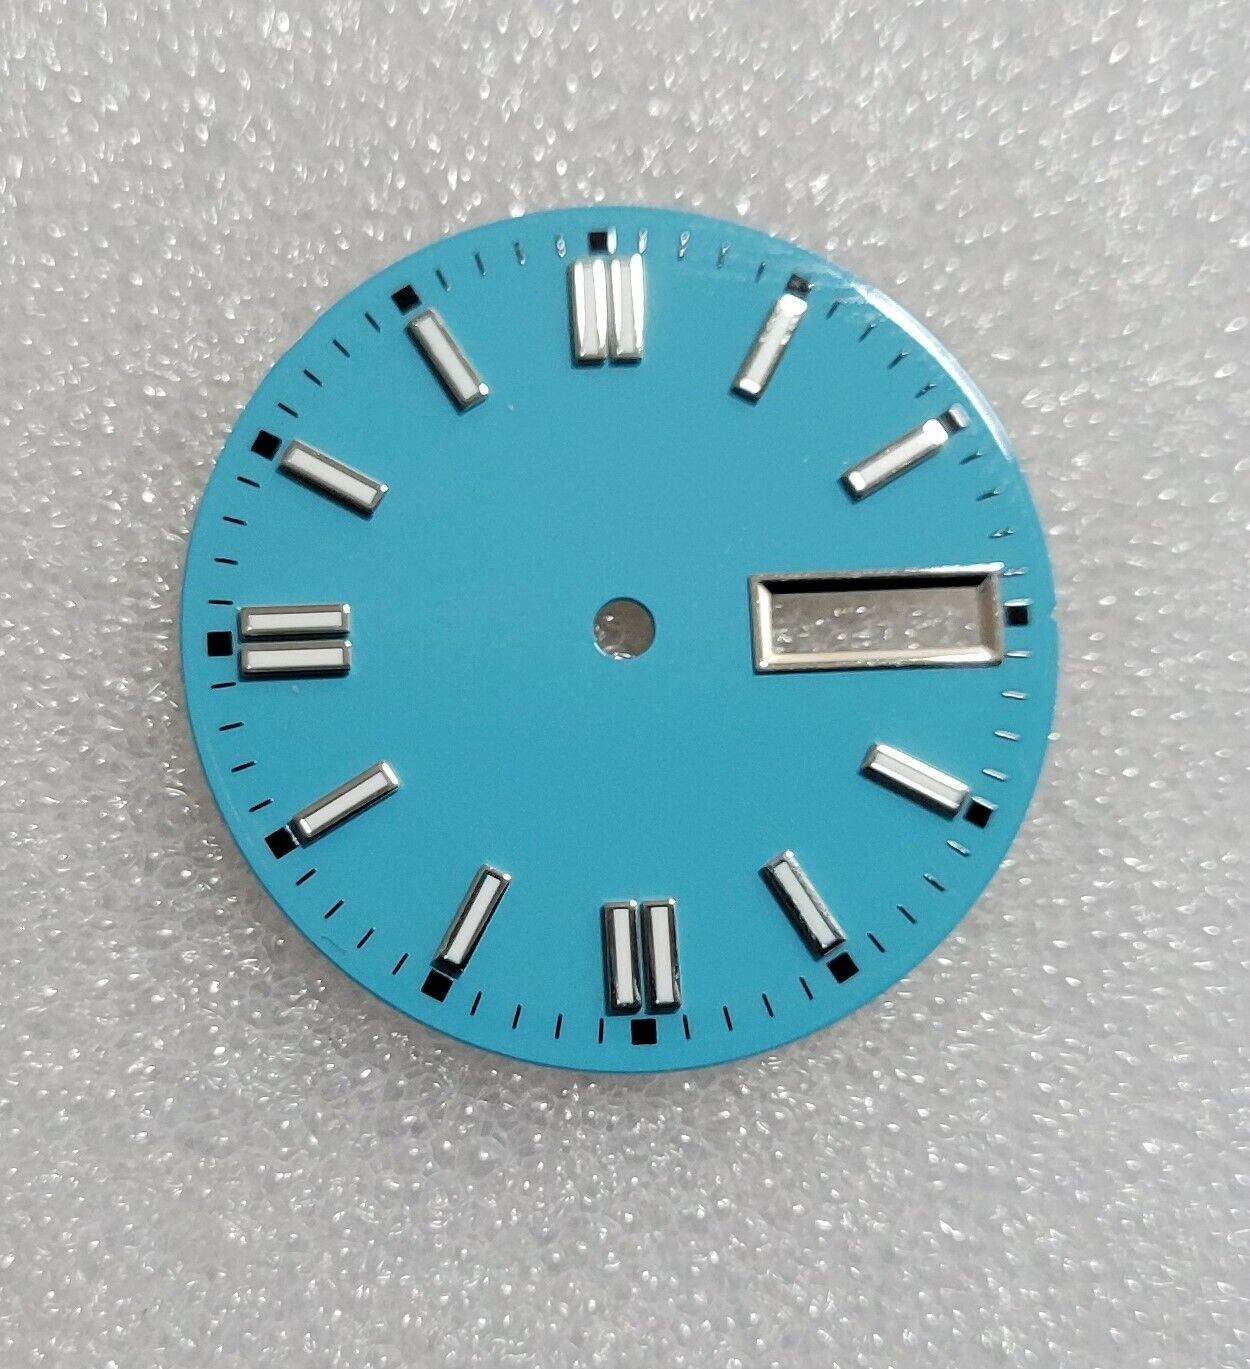 Dial New life for Watch MOD- 29mm Sky Blue fits Day Purchase Window fami NH36 Date